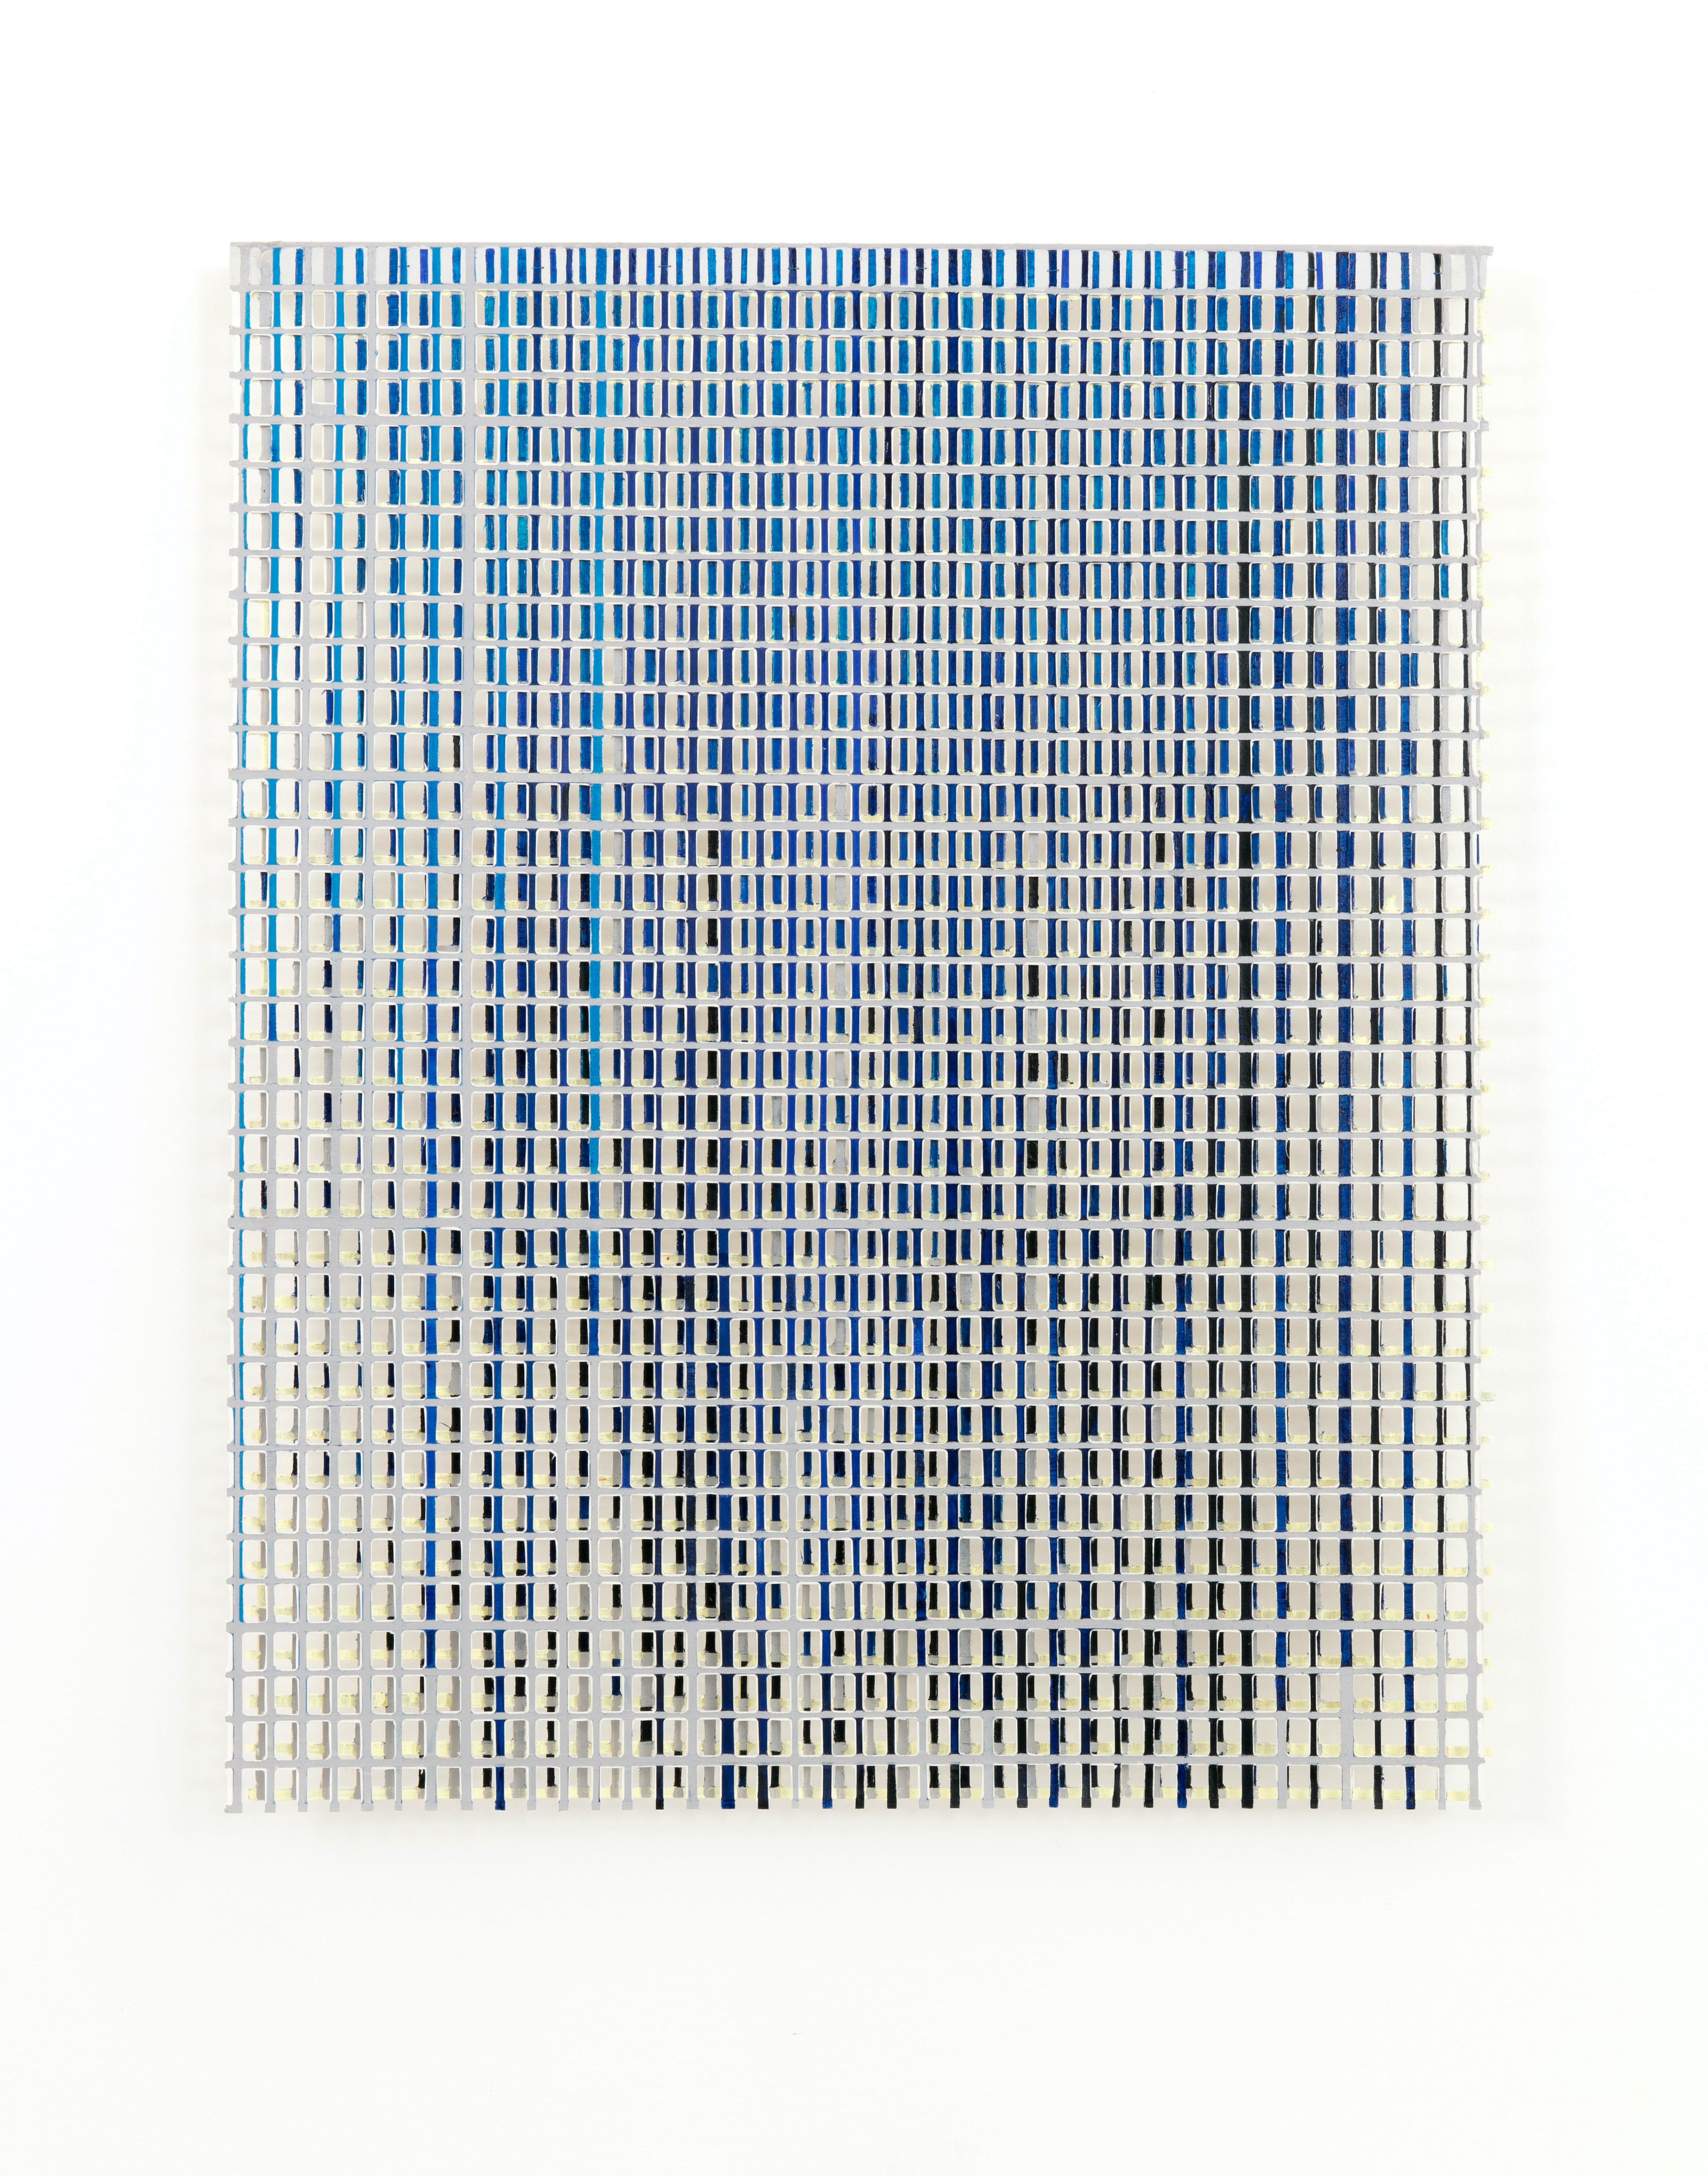 Jane Lackey, Doubling blue/lime, 2022, 20 x 16 inches, paint, hand cut, layered kozo paper